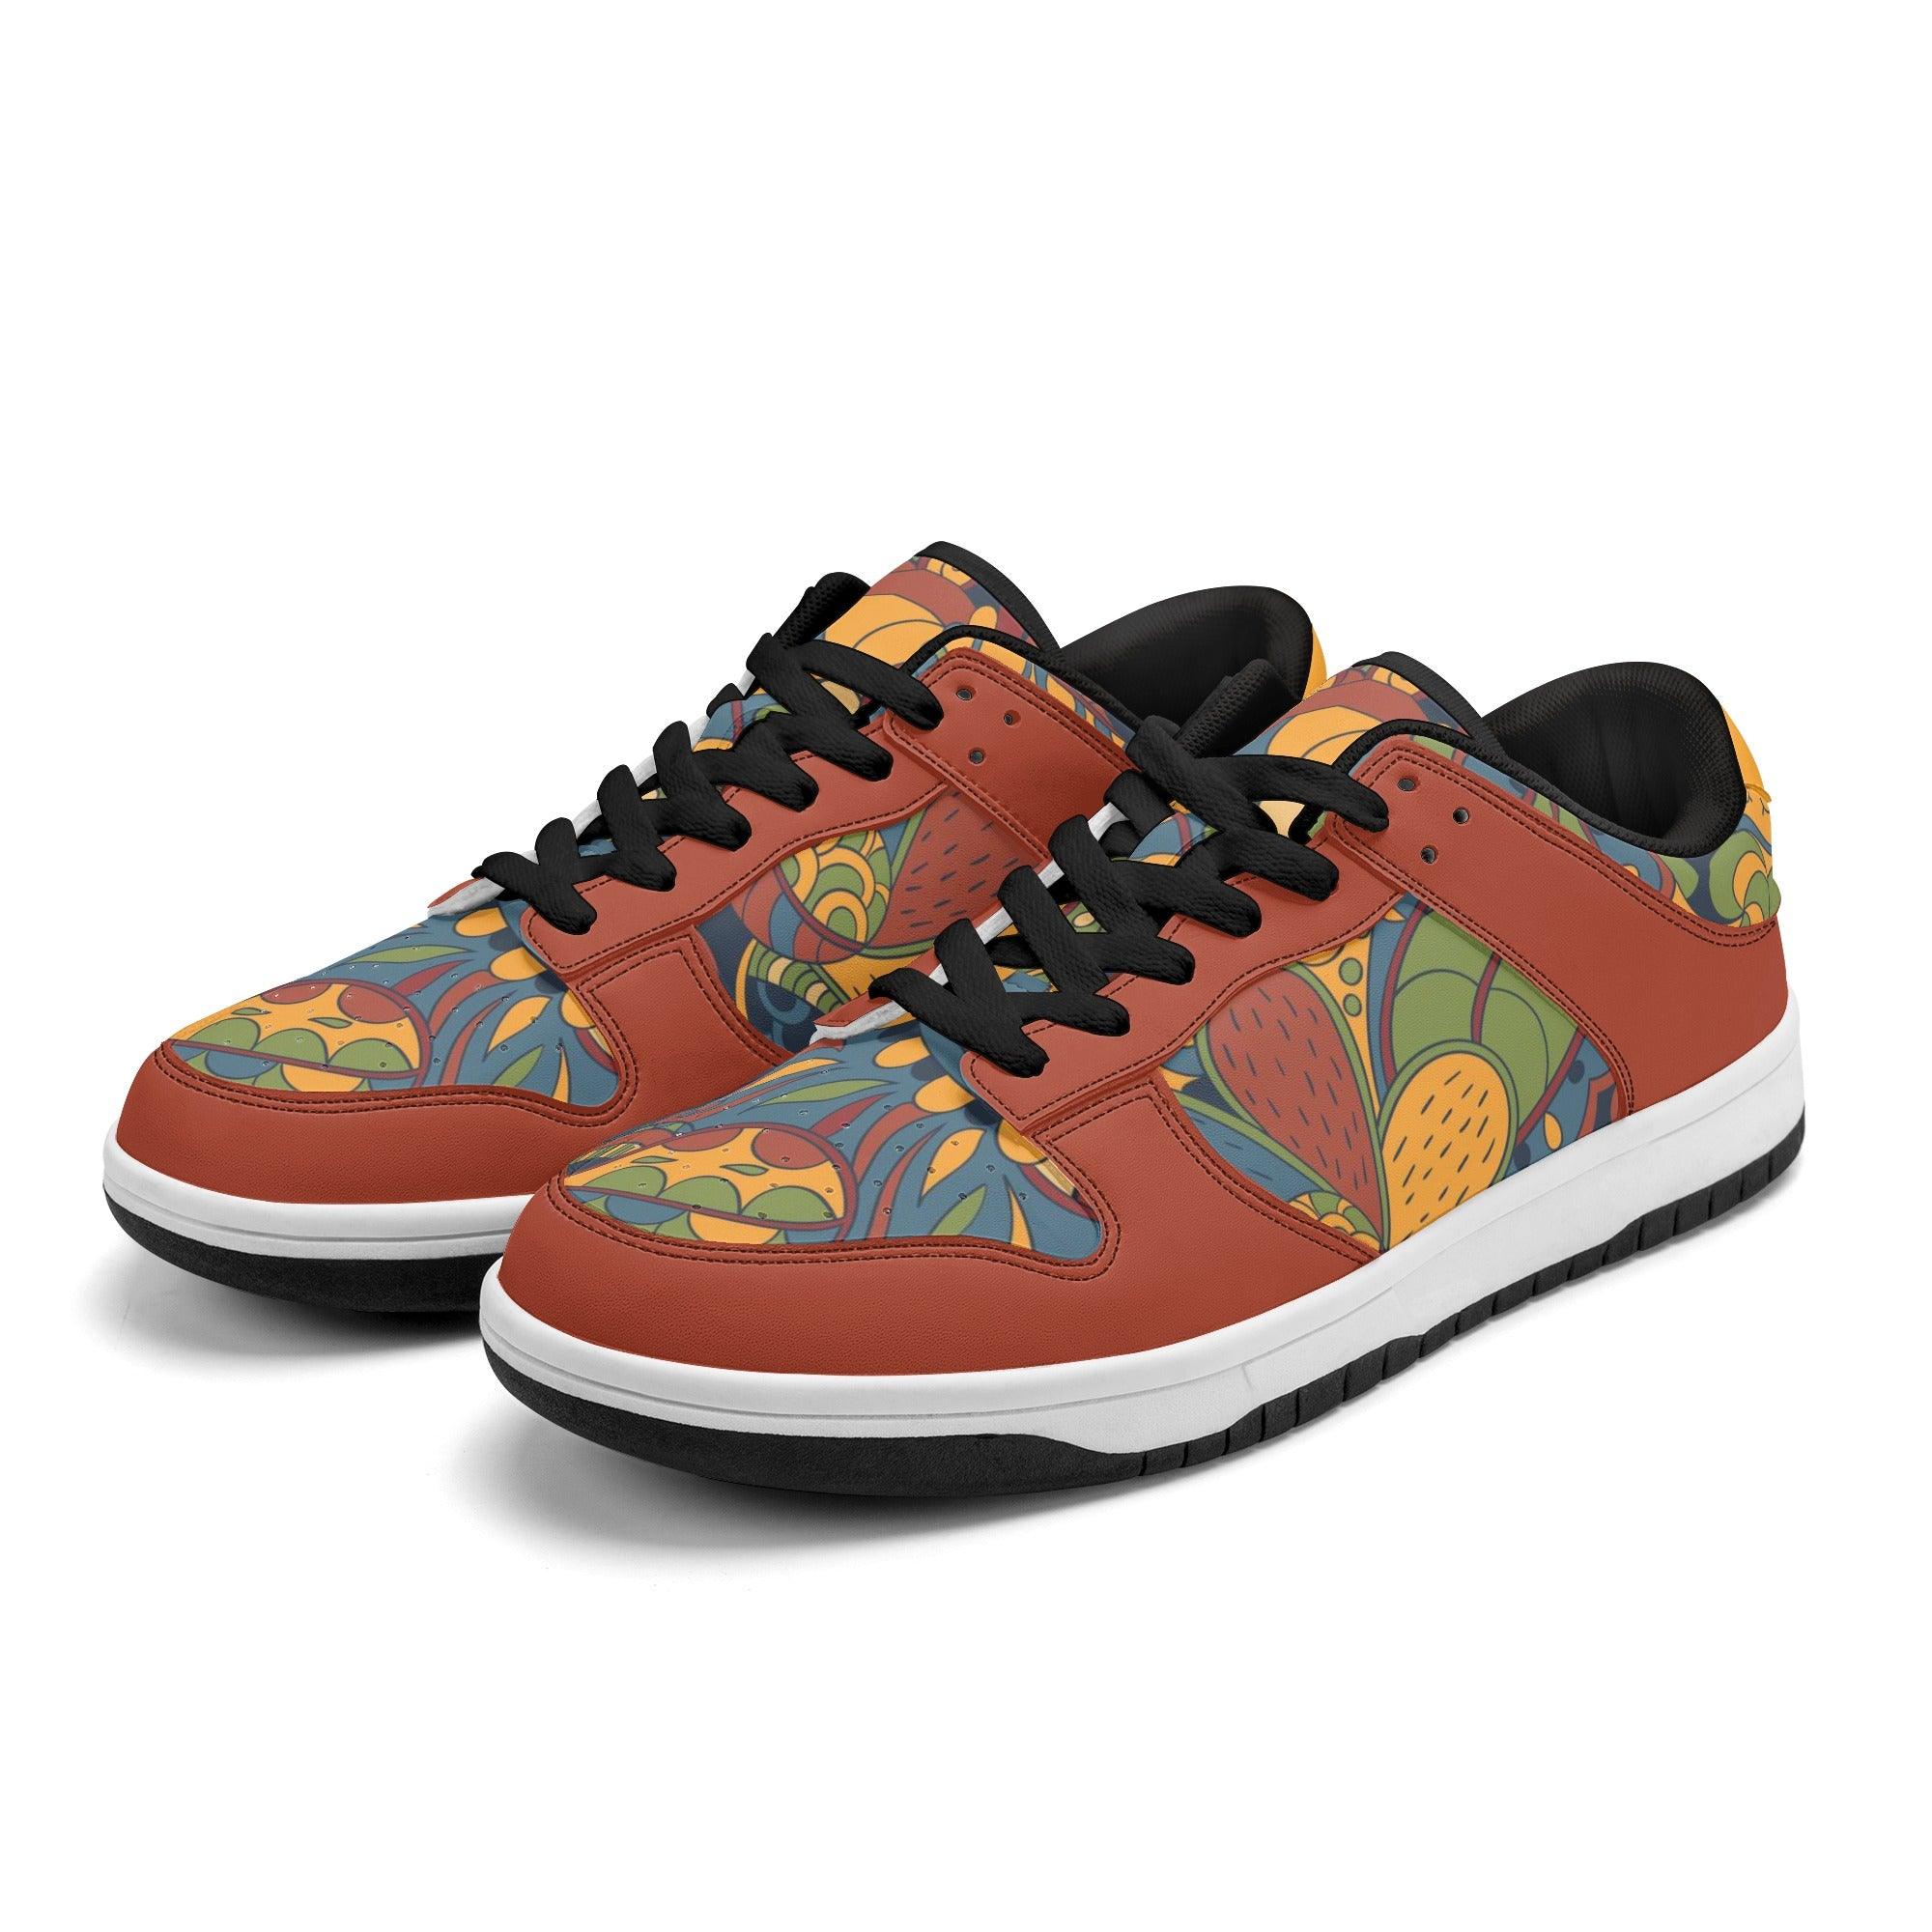 Ebisa Low Top Sneakers - Psychedelic Paisley - Red Mixed Media Retro Inspired Black Lace Casual Faux Leather Funky - Blissfully Brand